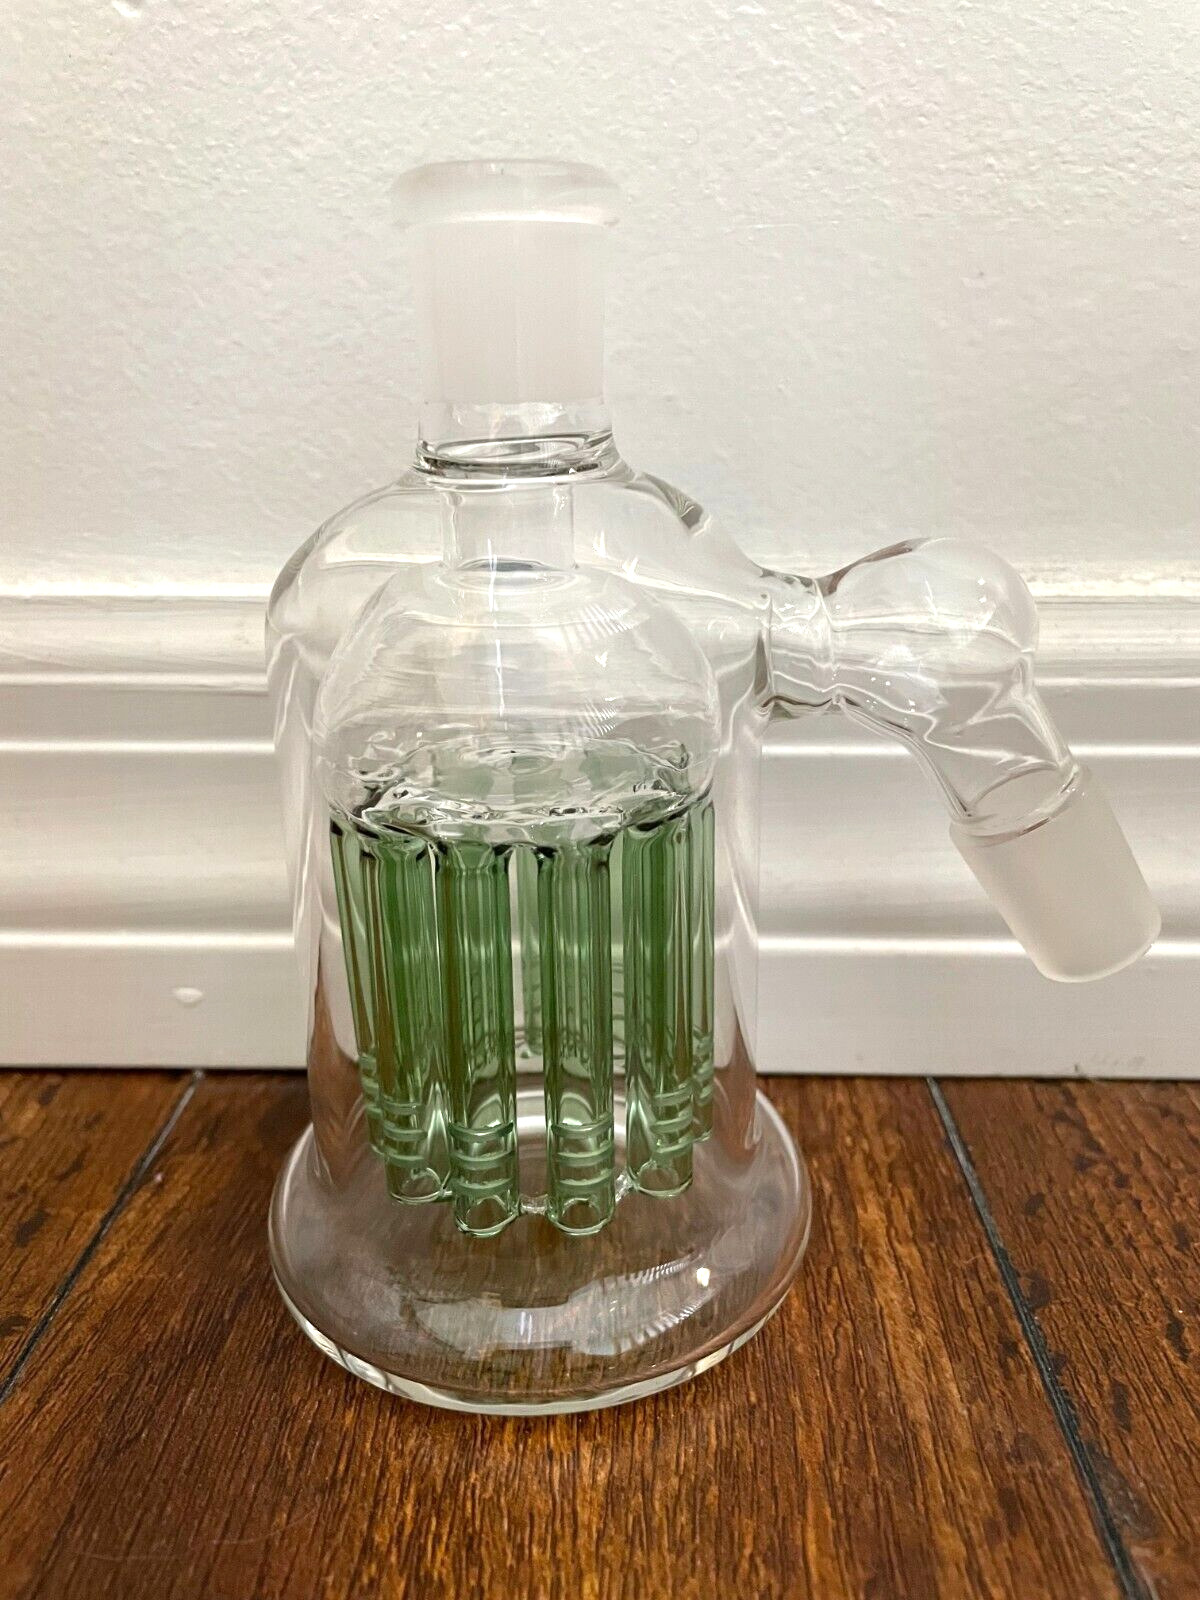 18MM CLEAR GLASS WATER PIPE ASH CATCHER CLEAR 11 ARM TREE PERC 45DEGREE GREEN